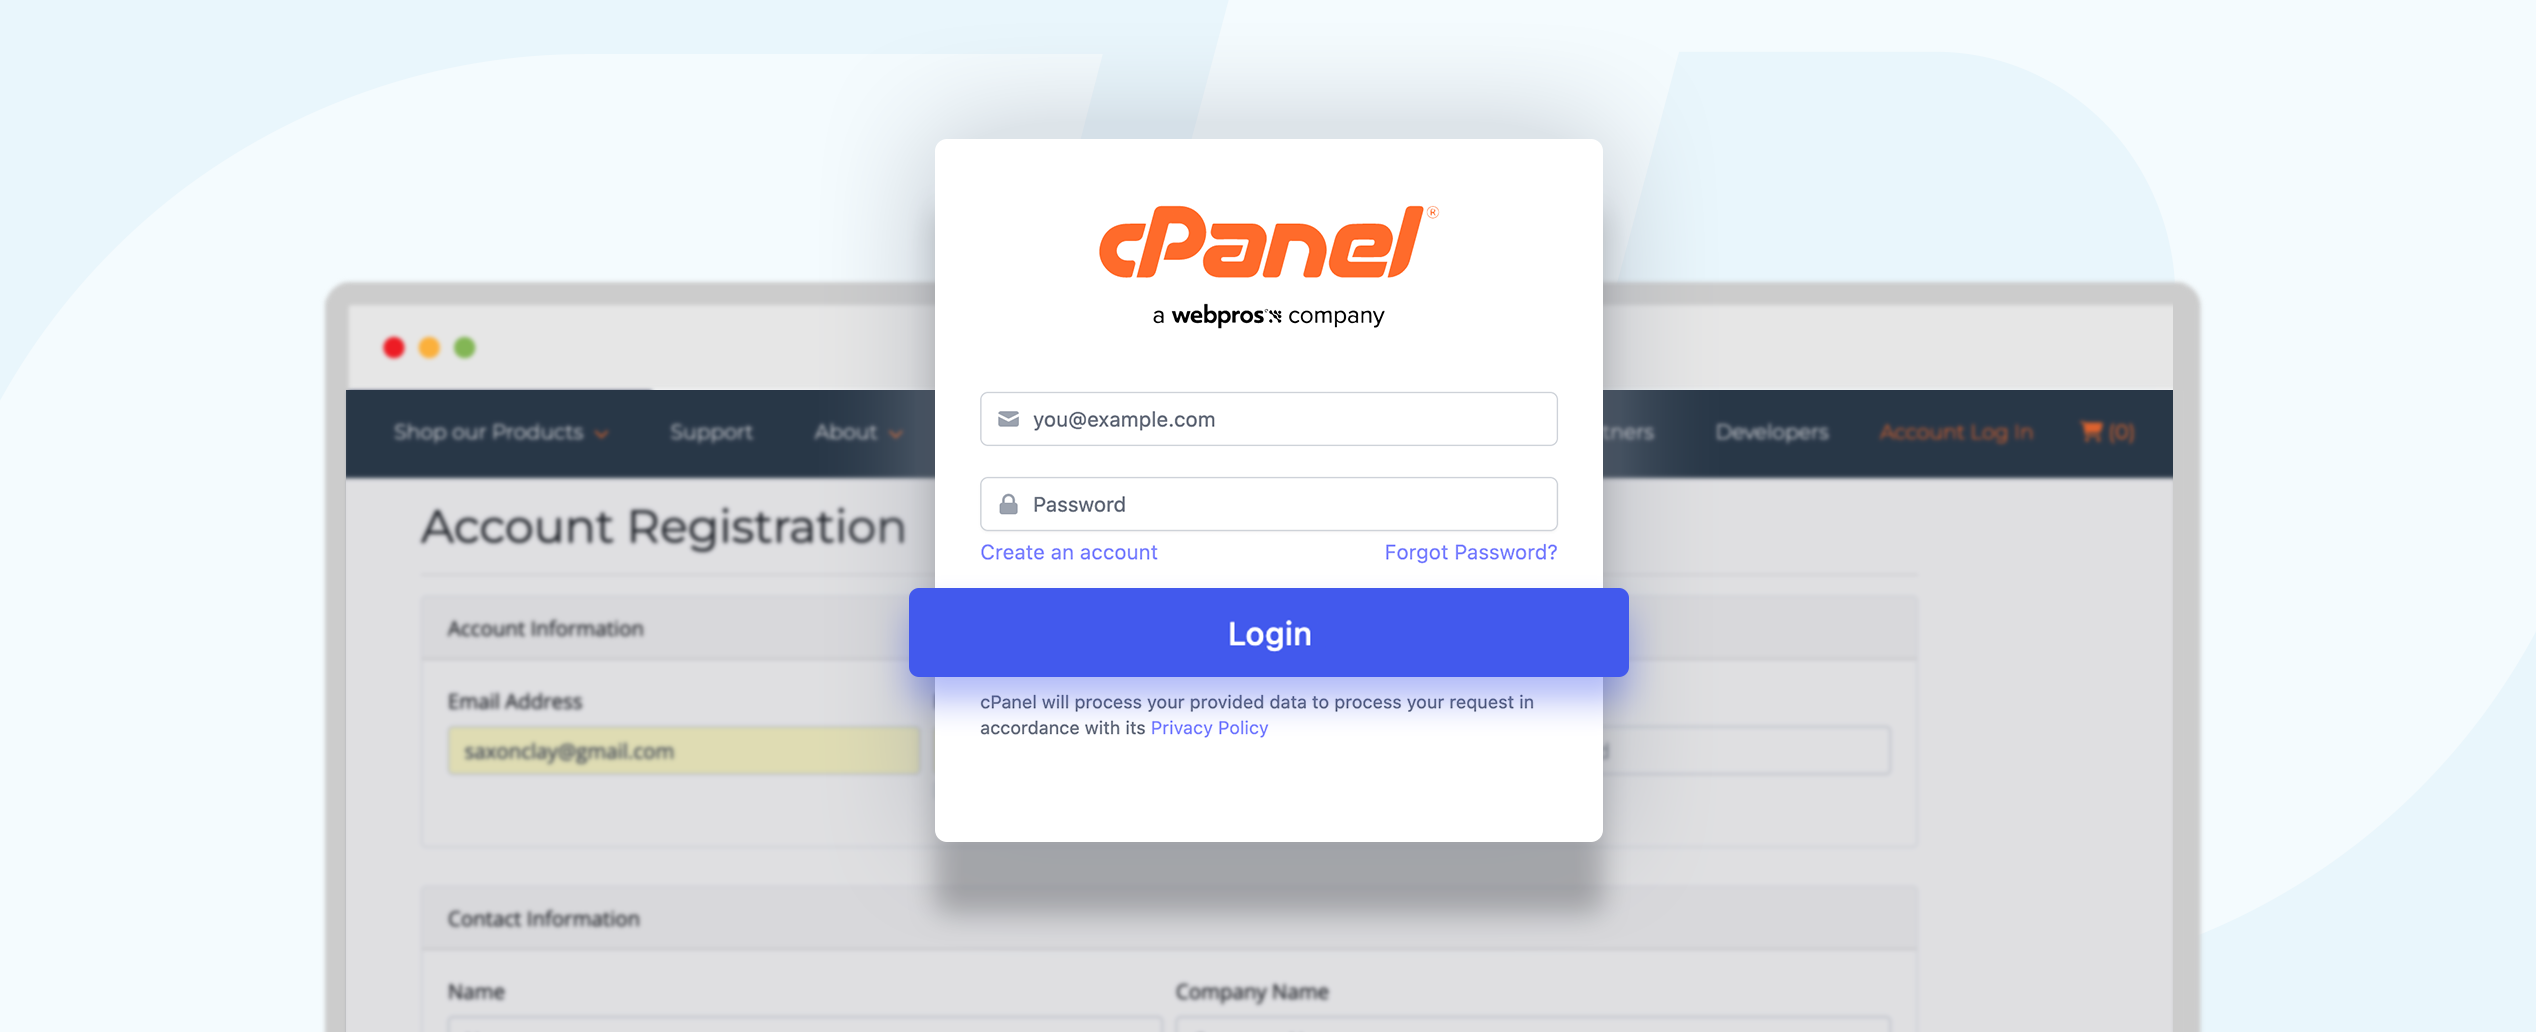 cPanel Community Forums integrated with Support Portal - cPanel Blog